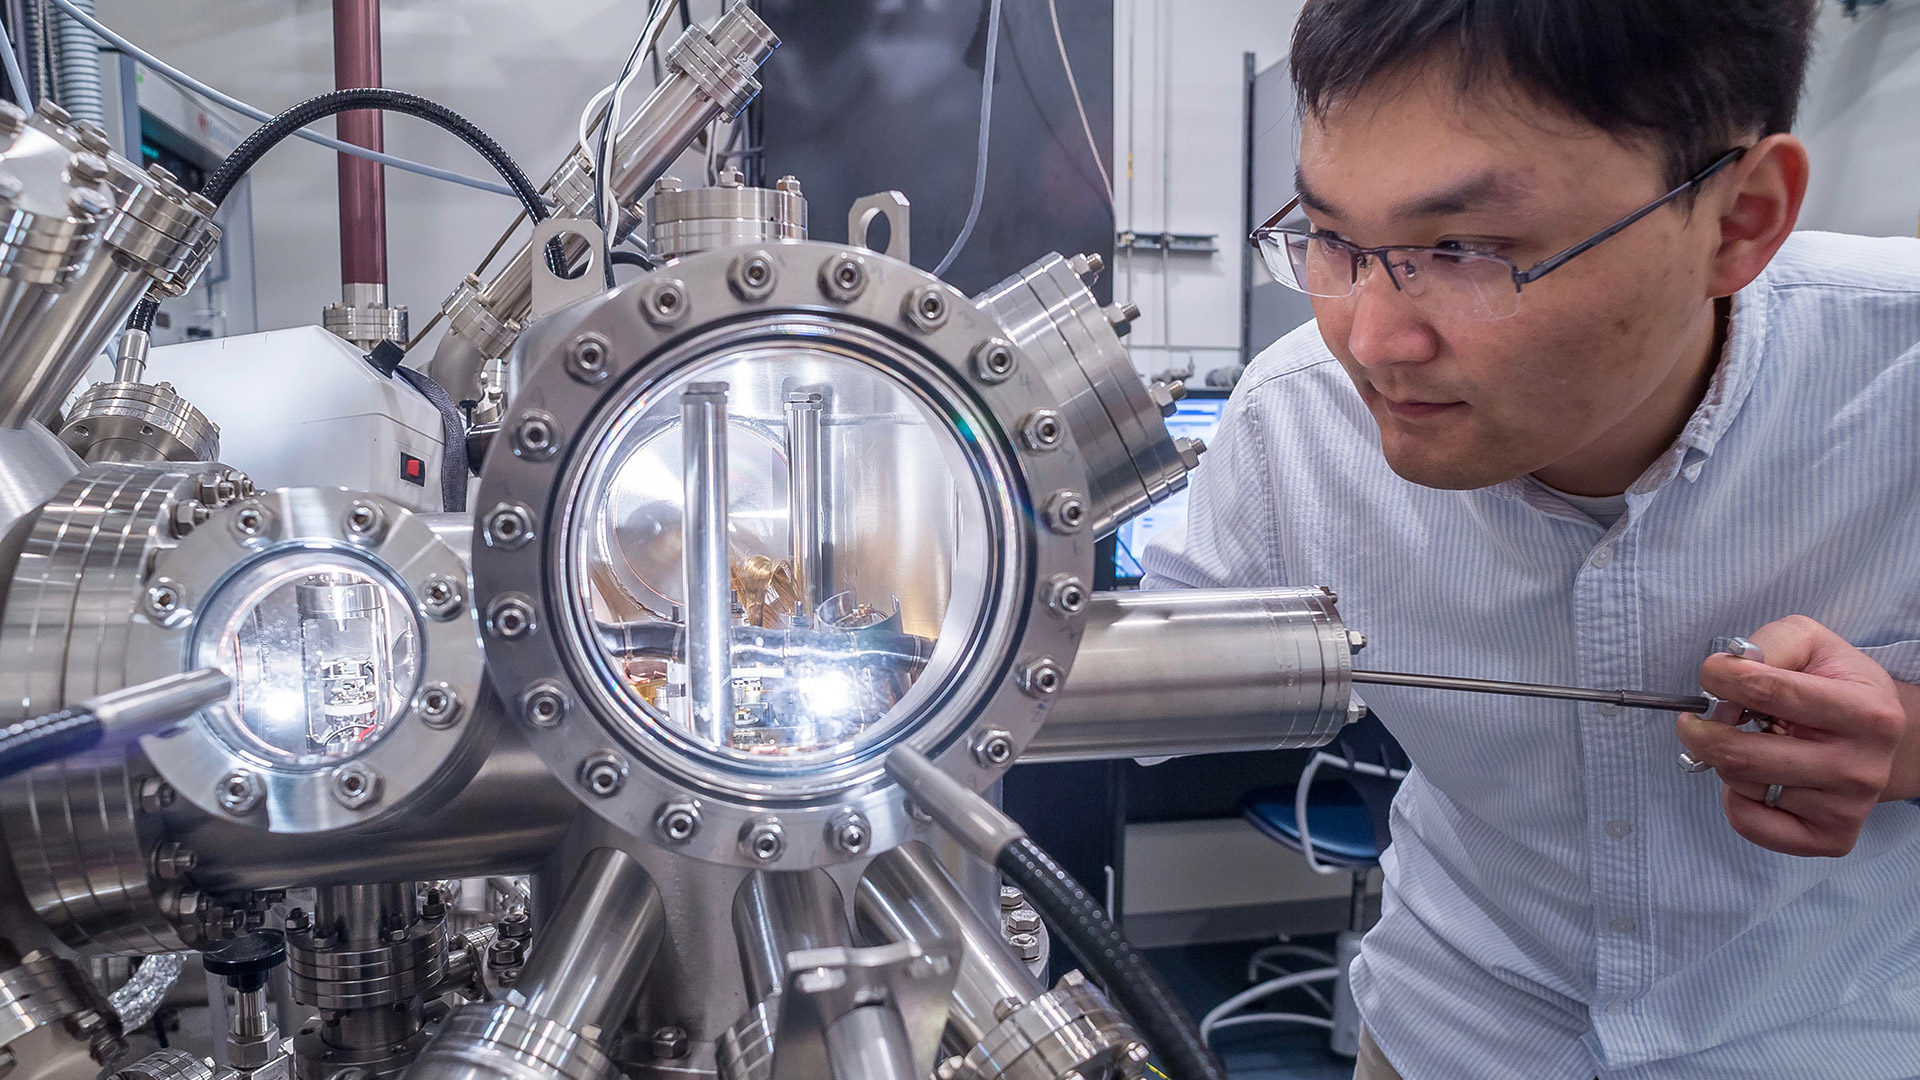 Postdoctoral researcher Rui Zhang at the Center for Nanoscale Materials uses an ultrahigh vacuum scanning tunneling microscope to image the surface structure of nanomaterials.